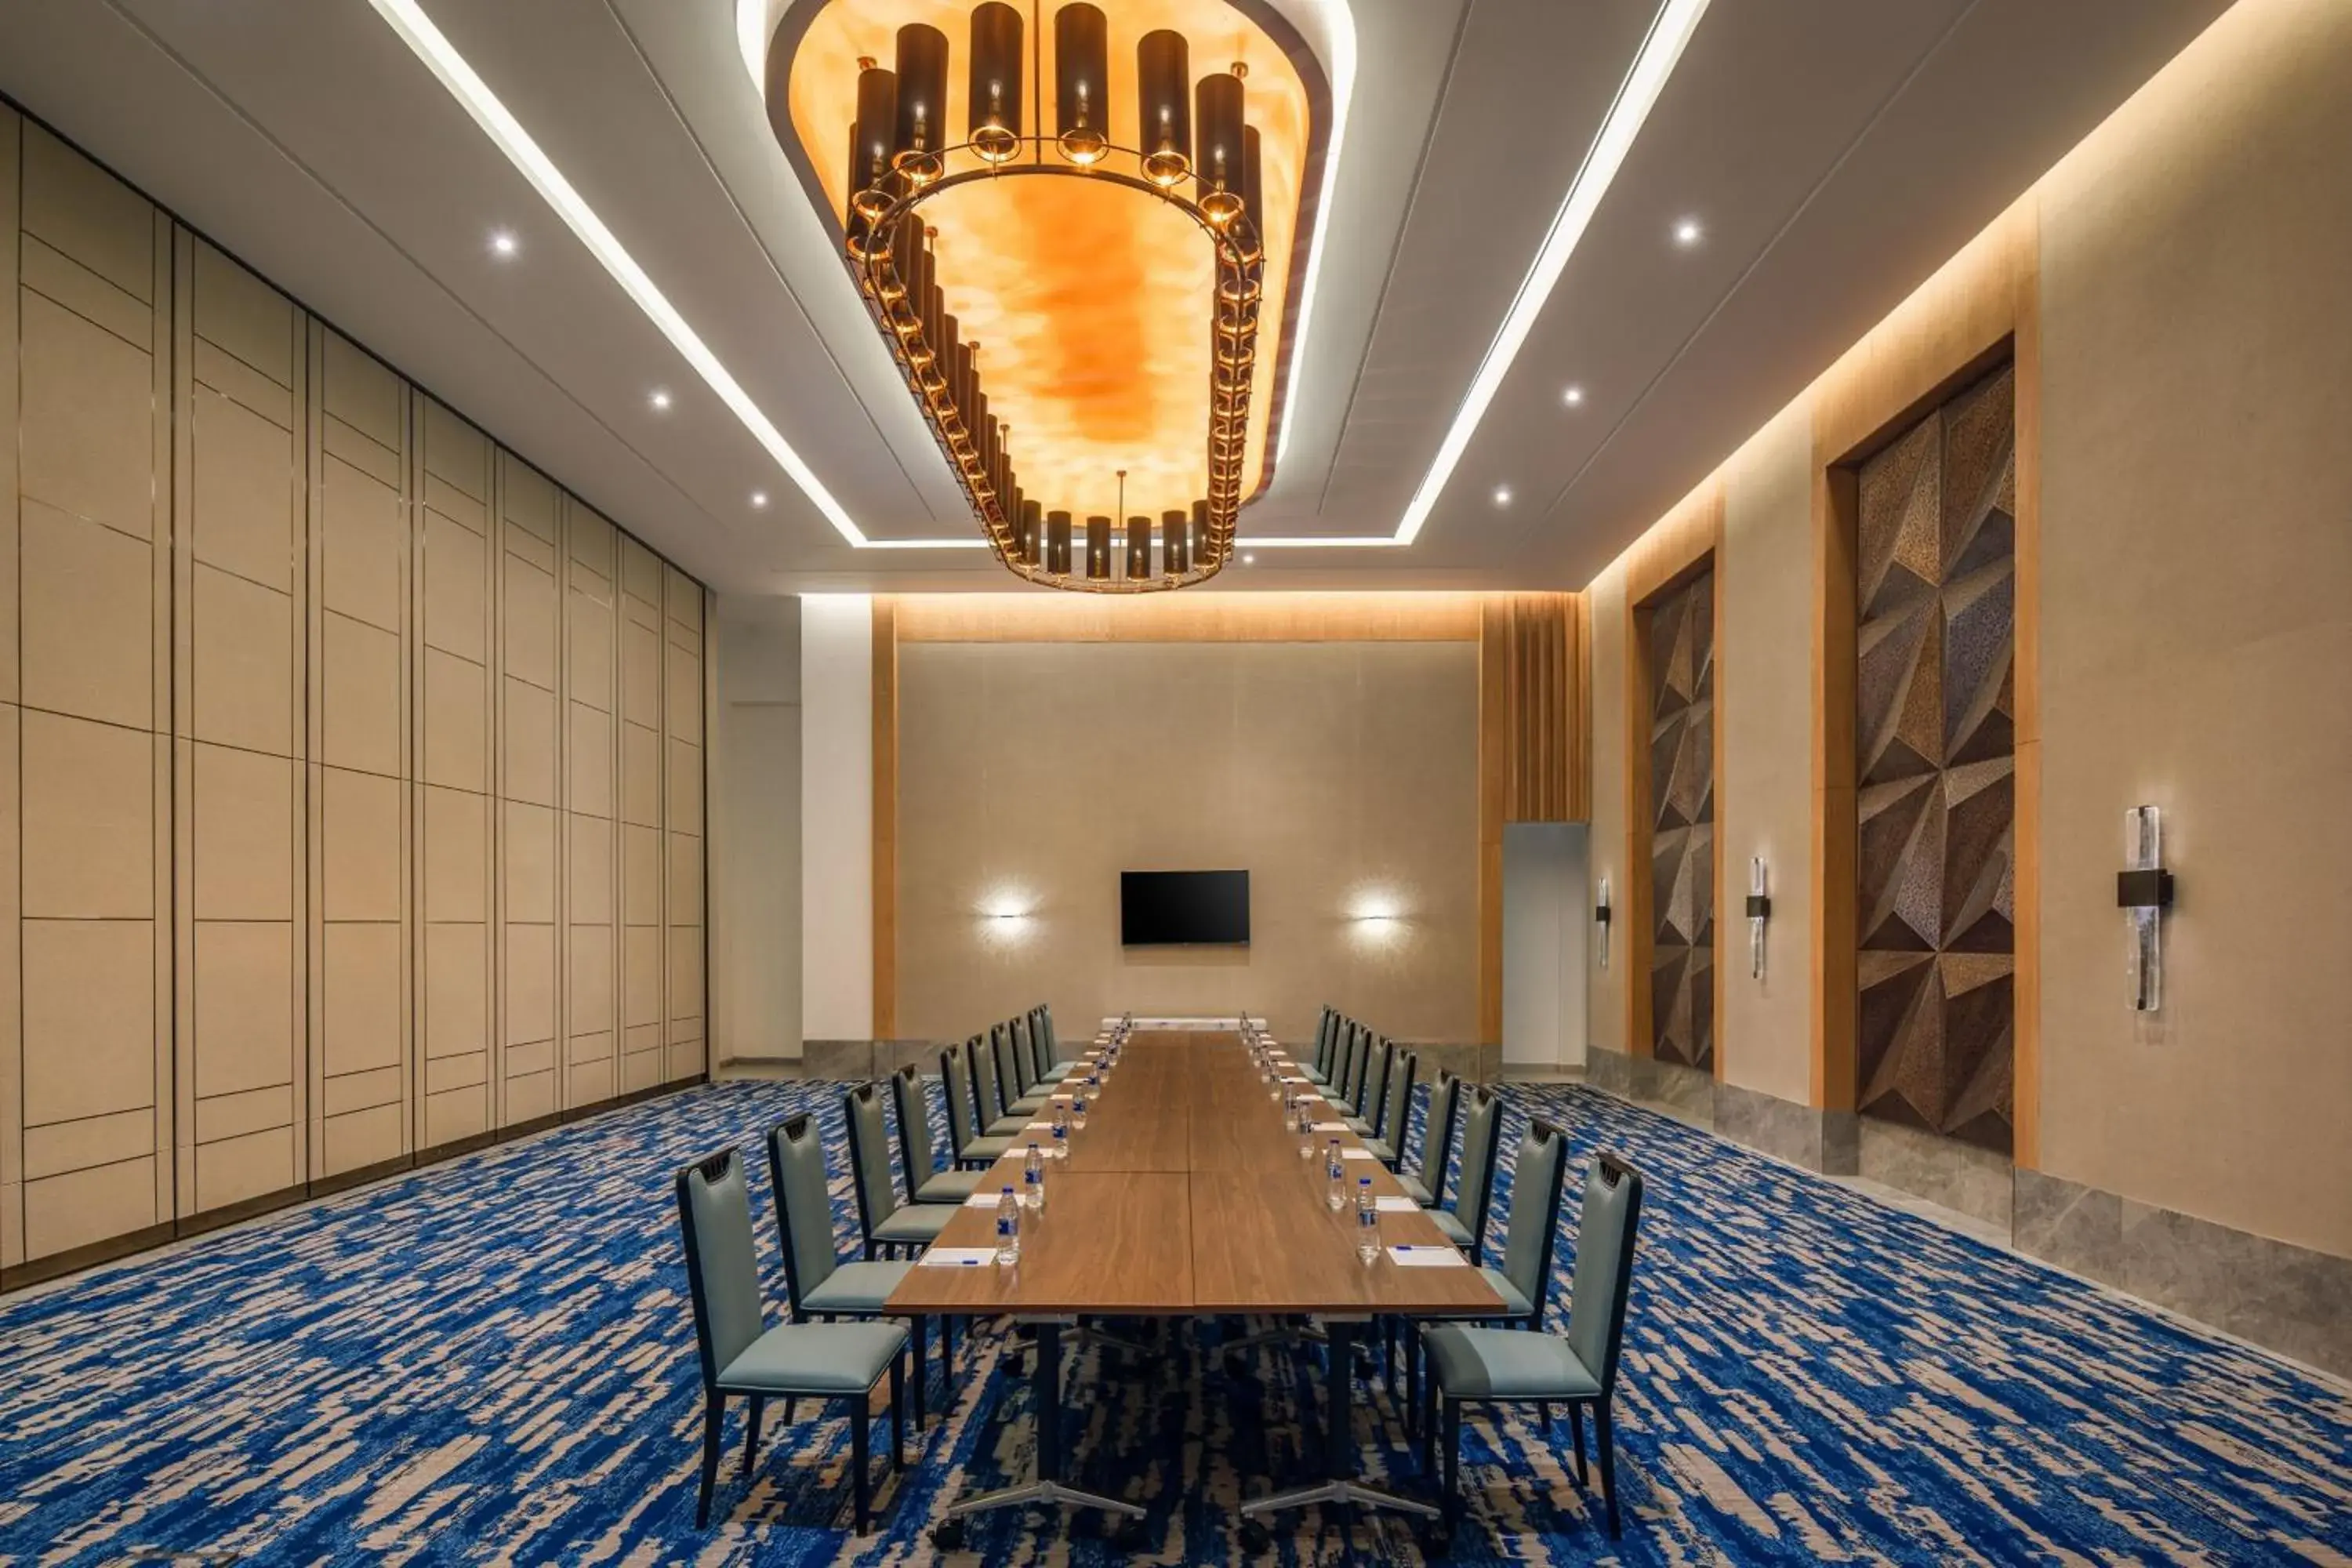 Meeting/conference room in Four Points by Sheraton Kampala